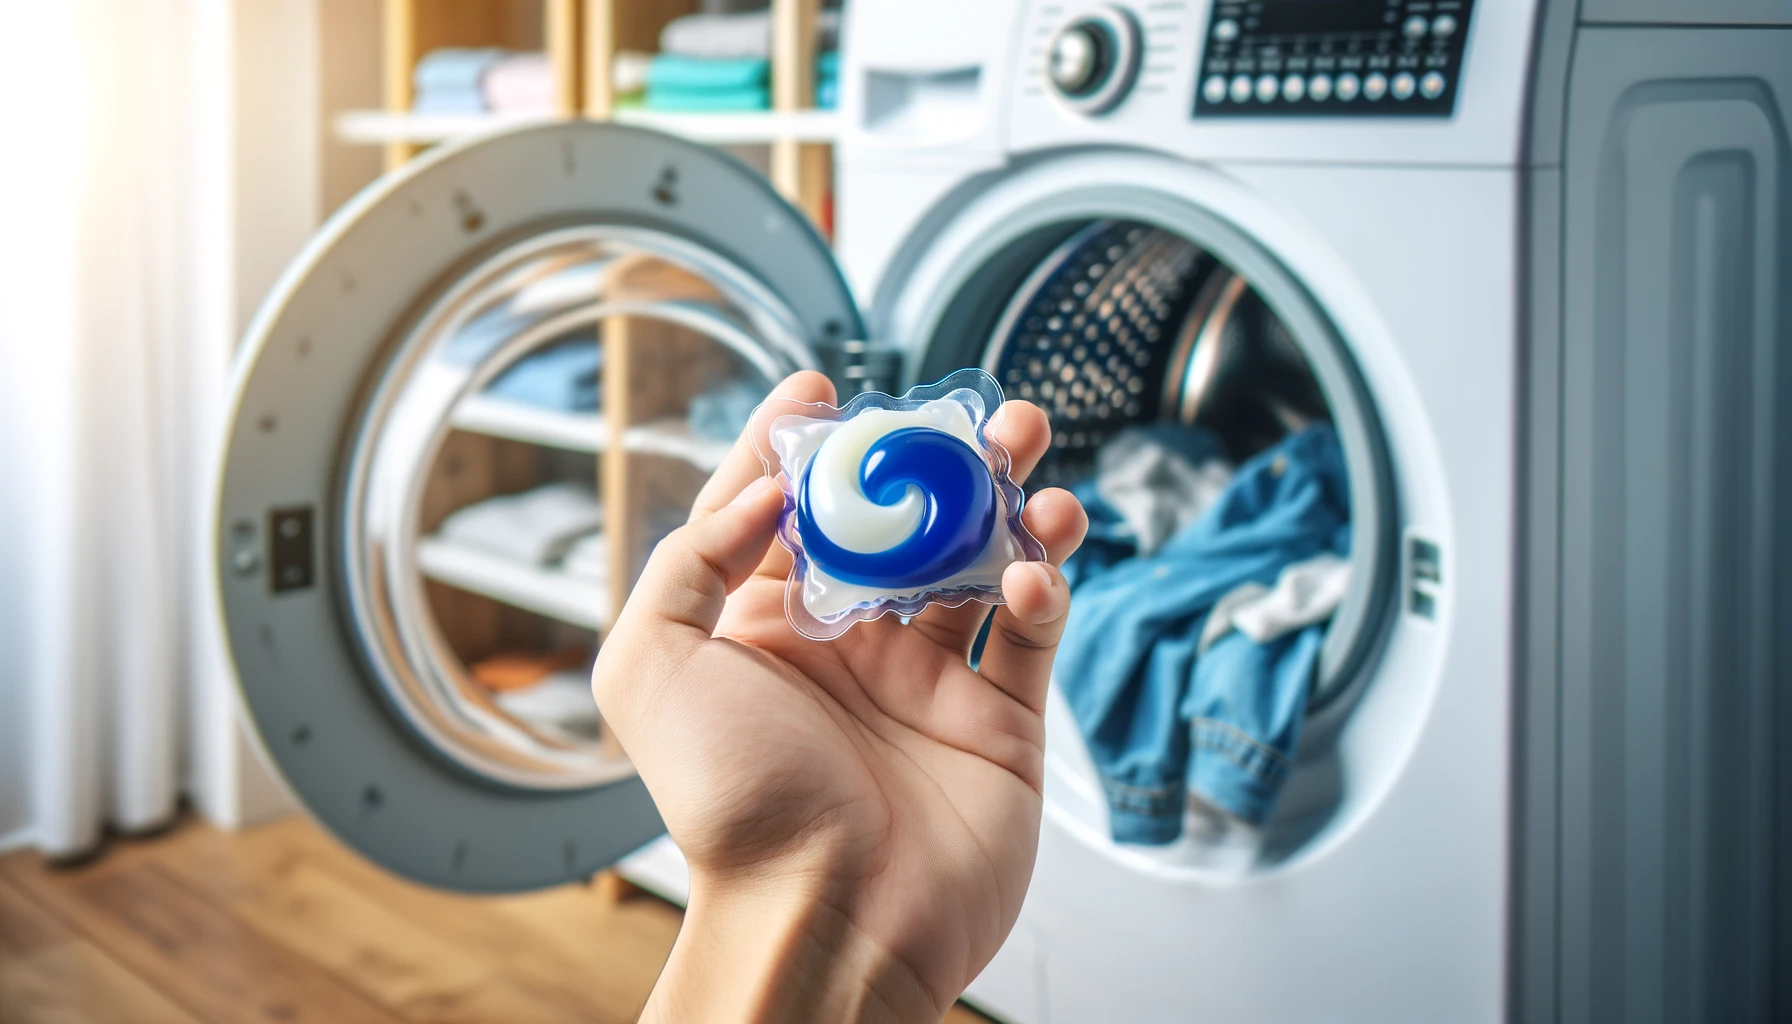 A hand holds a blue and white dishwasher pod in front of a blurry washing machine loaded with clothes.